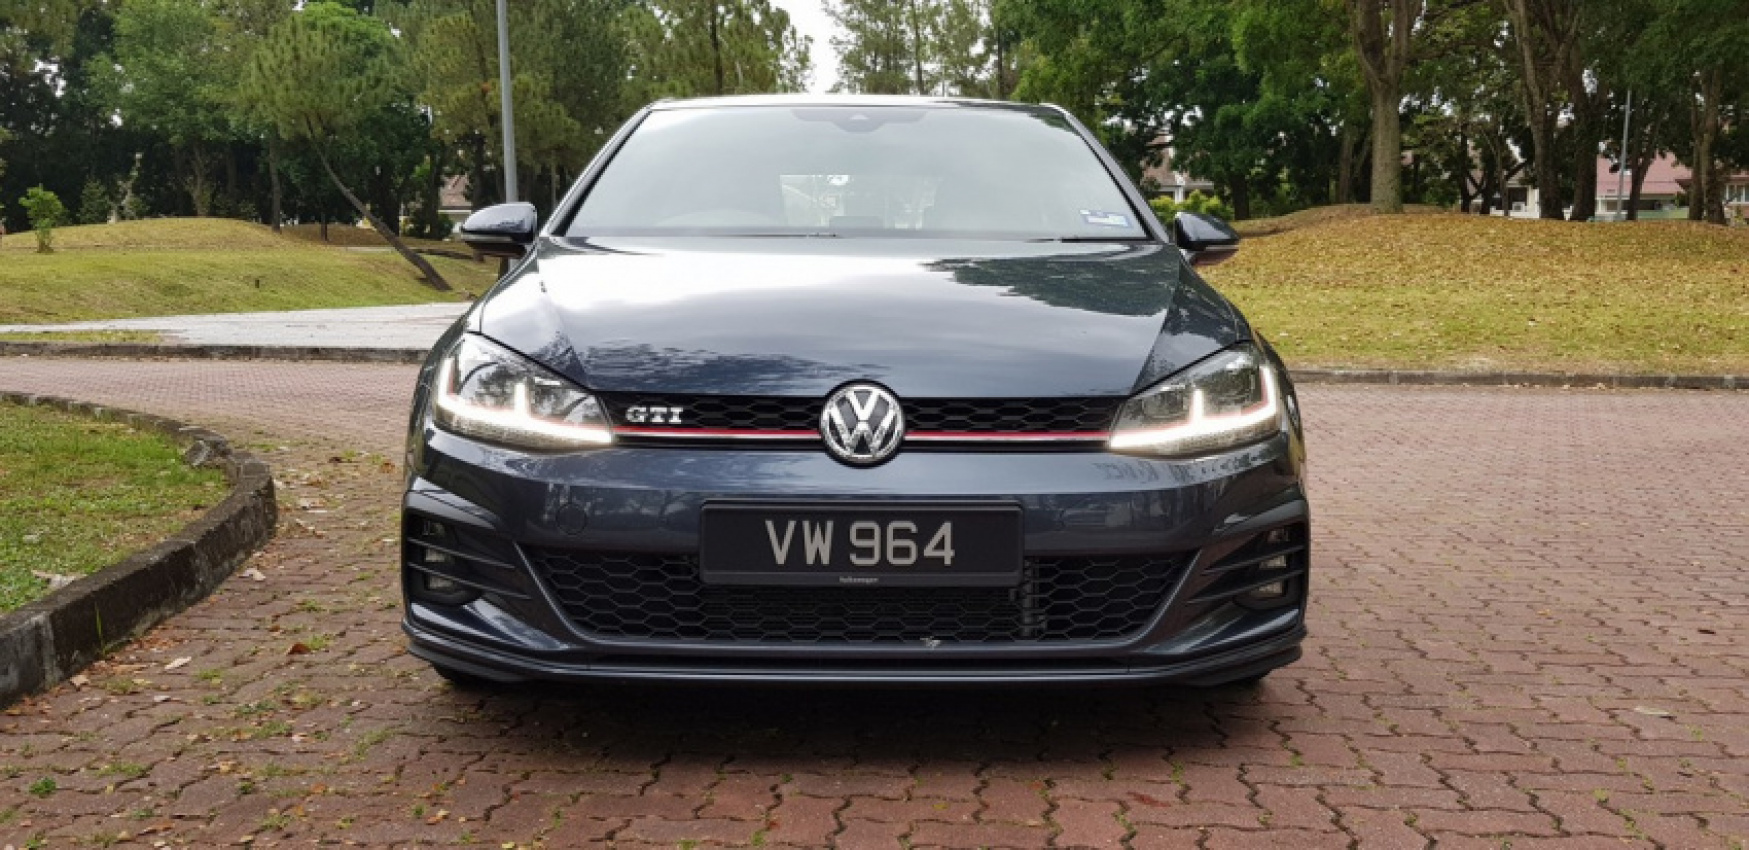 autos, car brands, cars, volkswagen, hatchback, malaysia, review, test drive, volkswagen malaysia, volkswagen golf gti 7.5 – tried, tested and proven